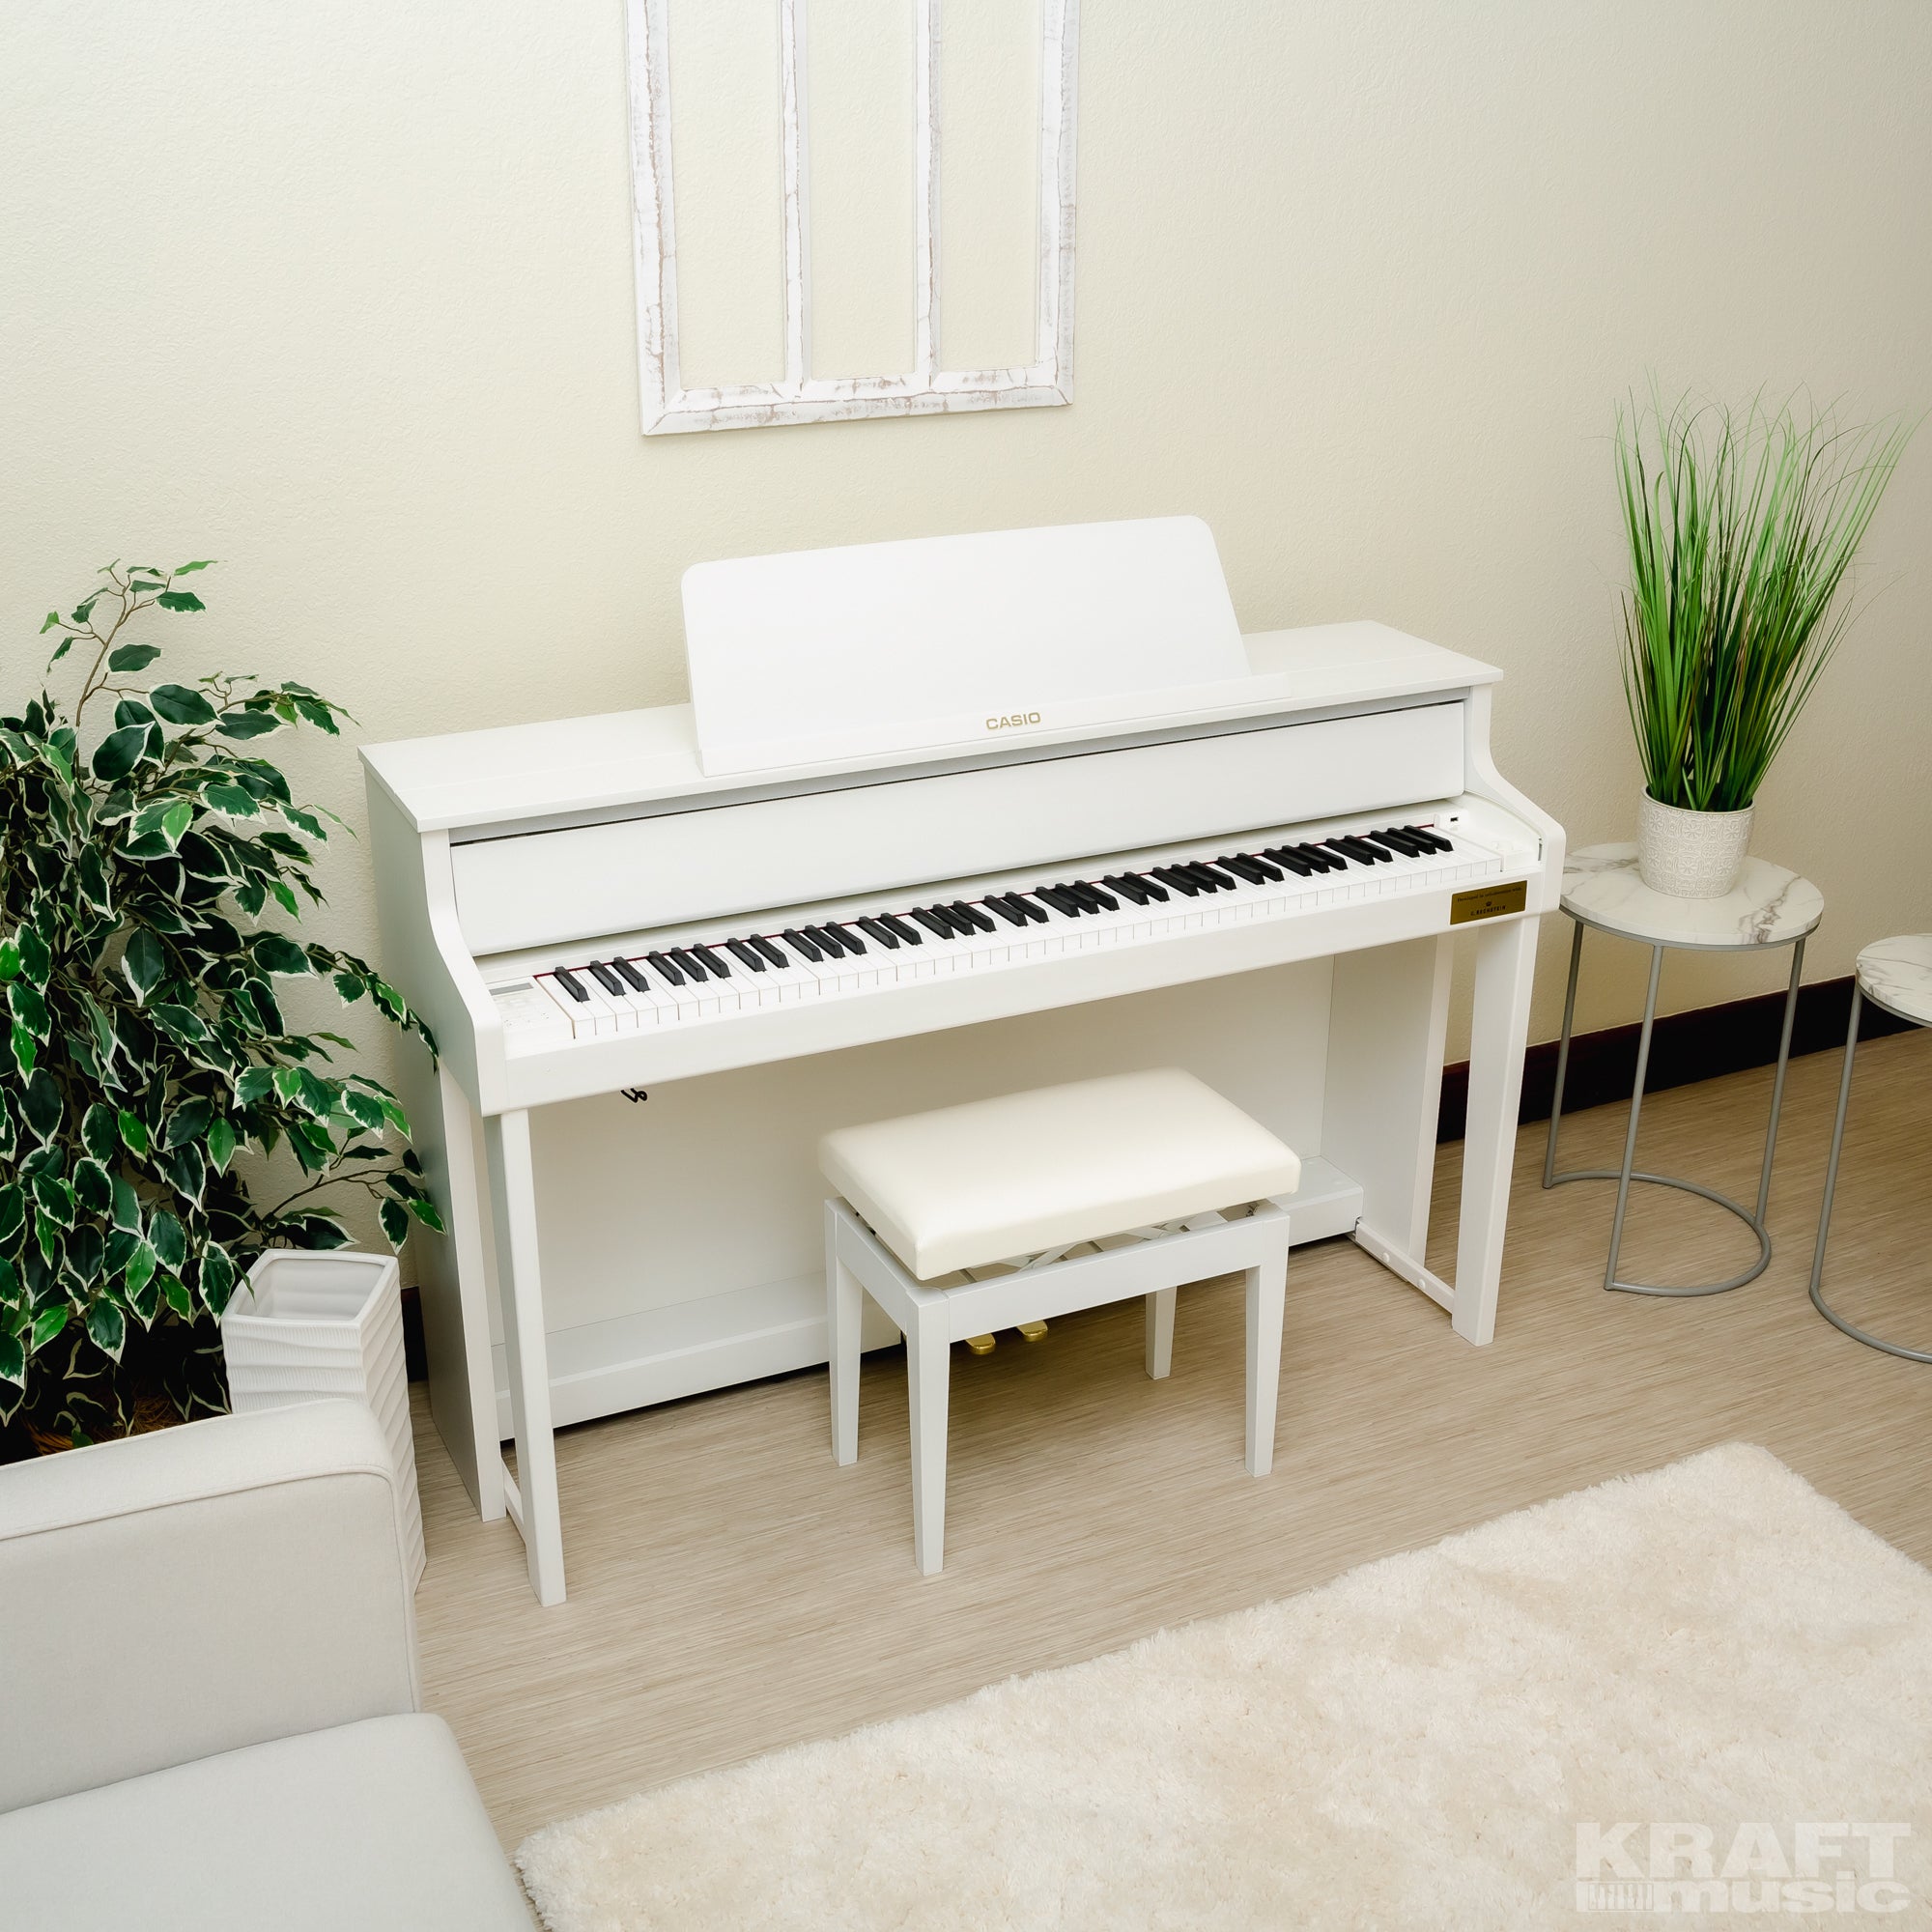 Casio Celviano Grand Hybrid GP-310 Digital Piano - Natural White Wood - Right angle in a stylish living room